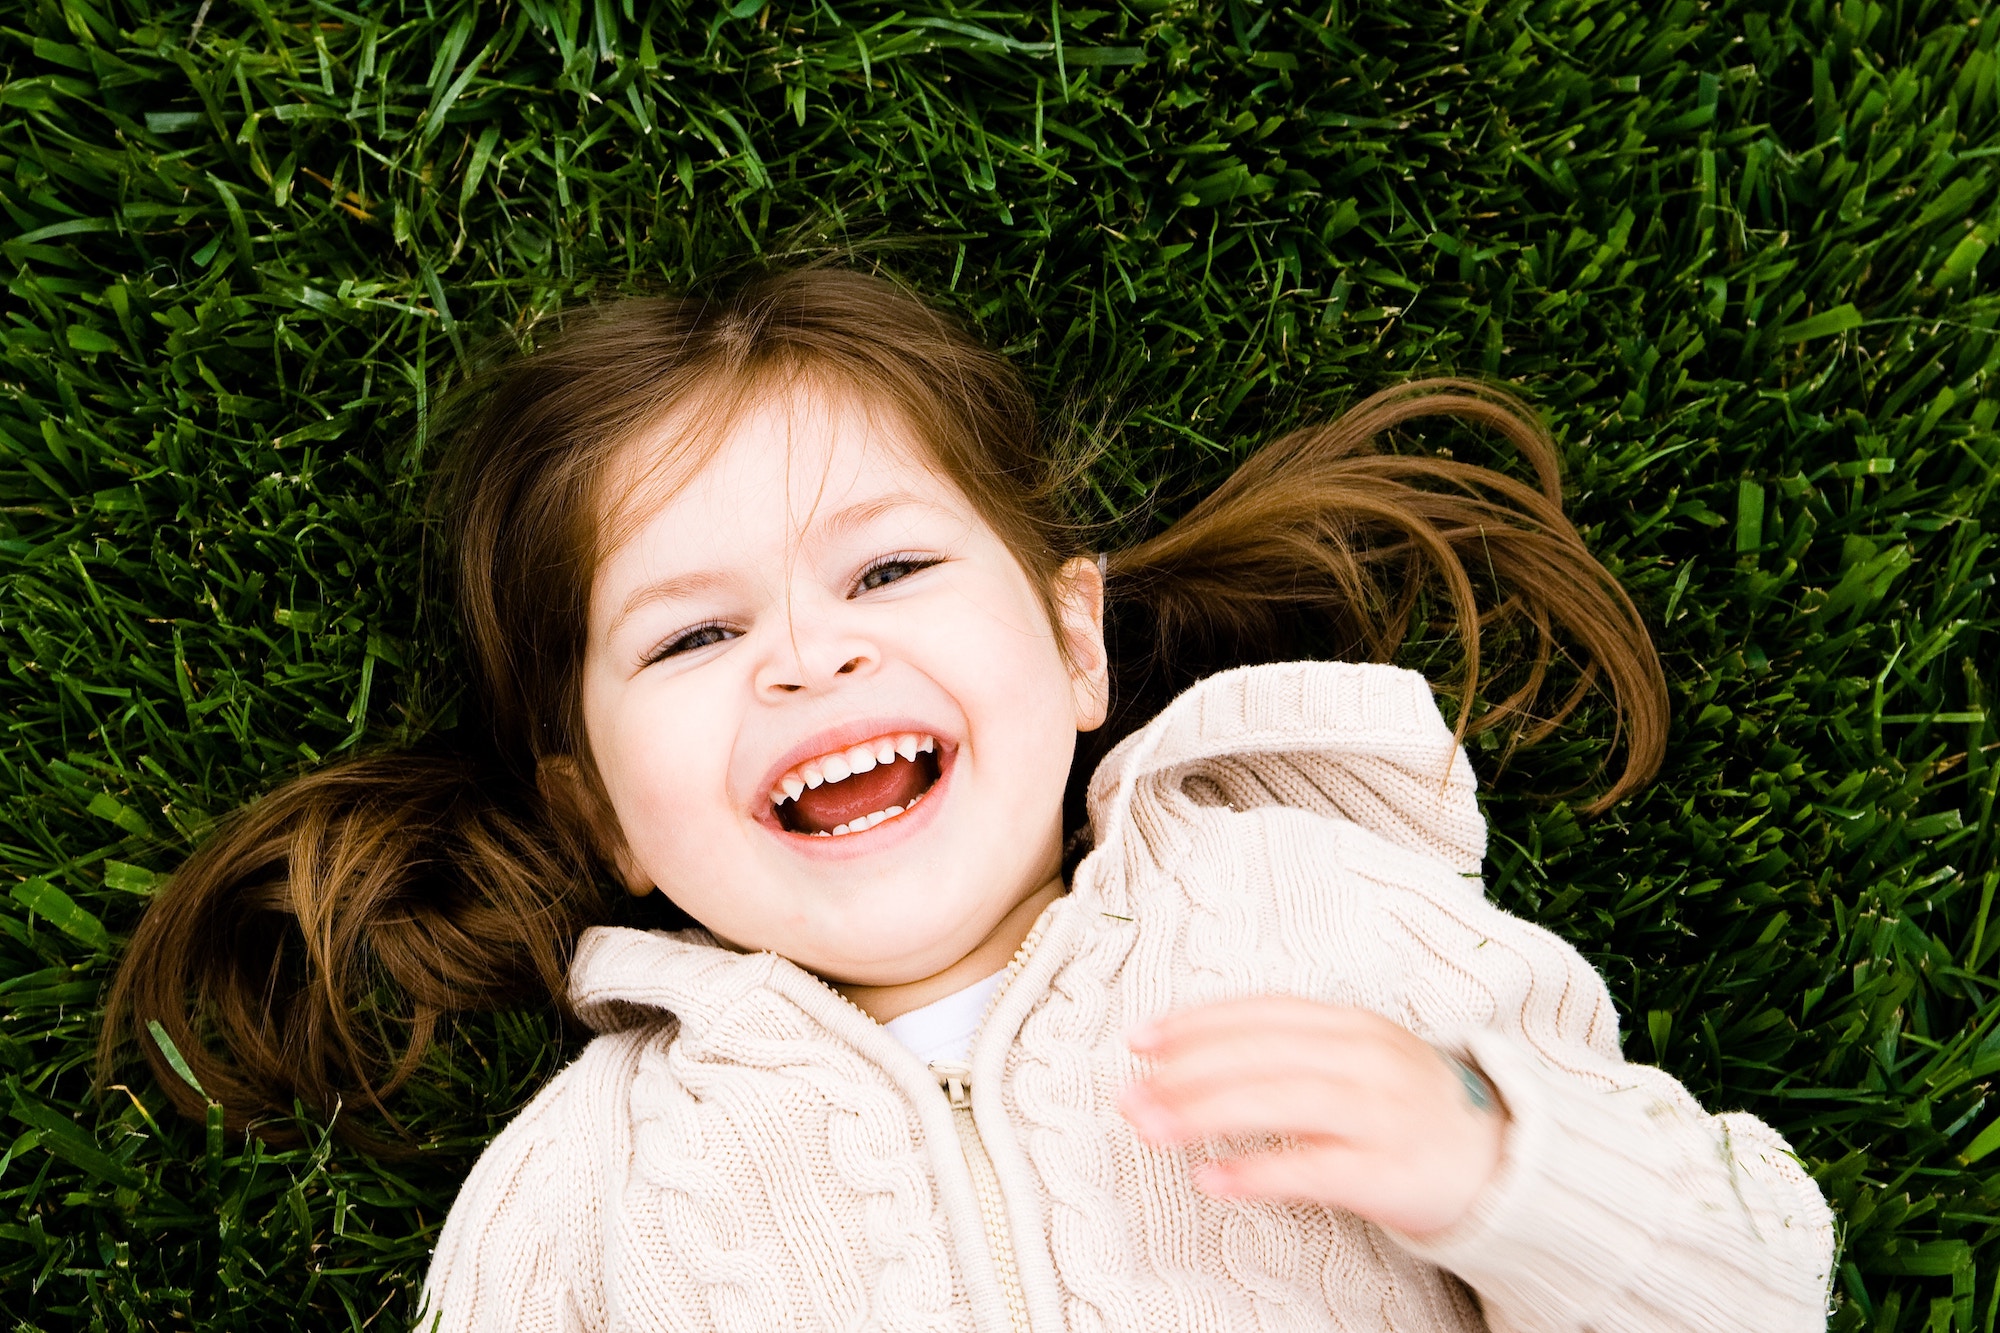 Little girl laying on grass in a pink jacket, smiling as the camera captures her from above.